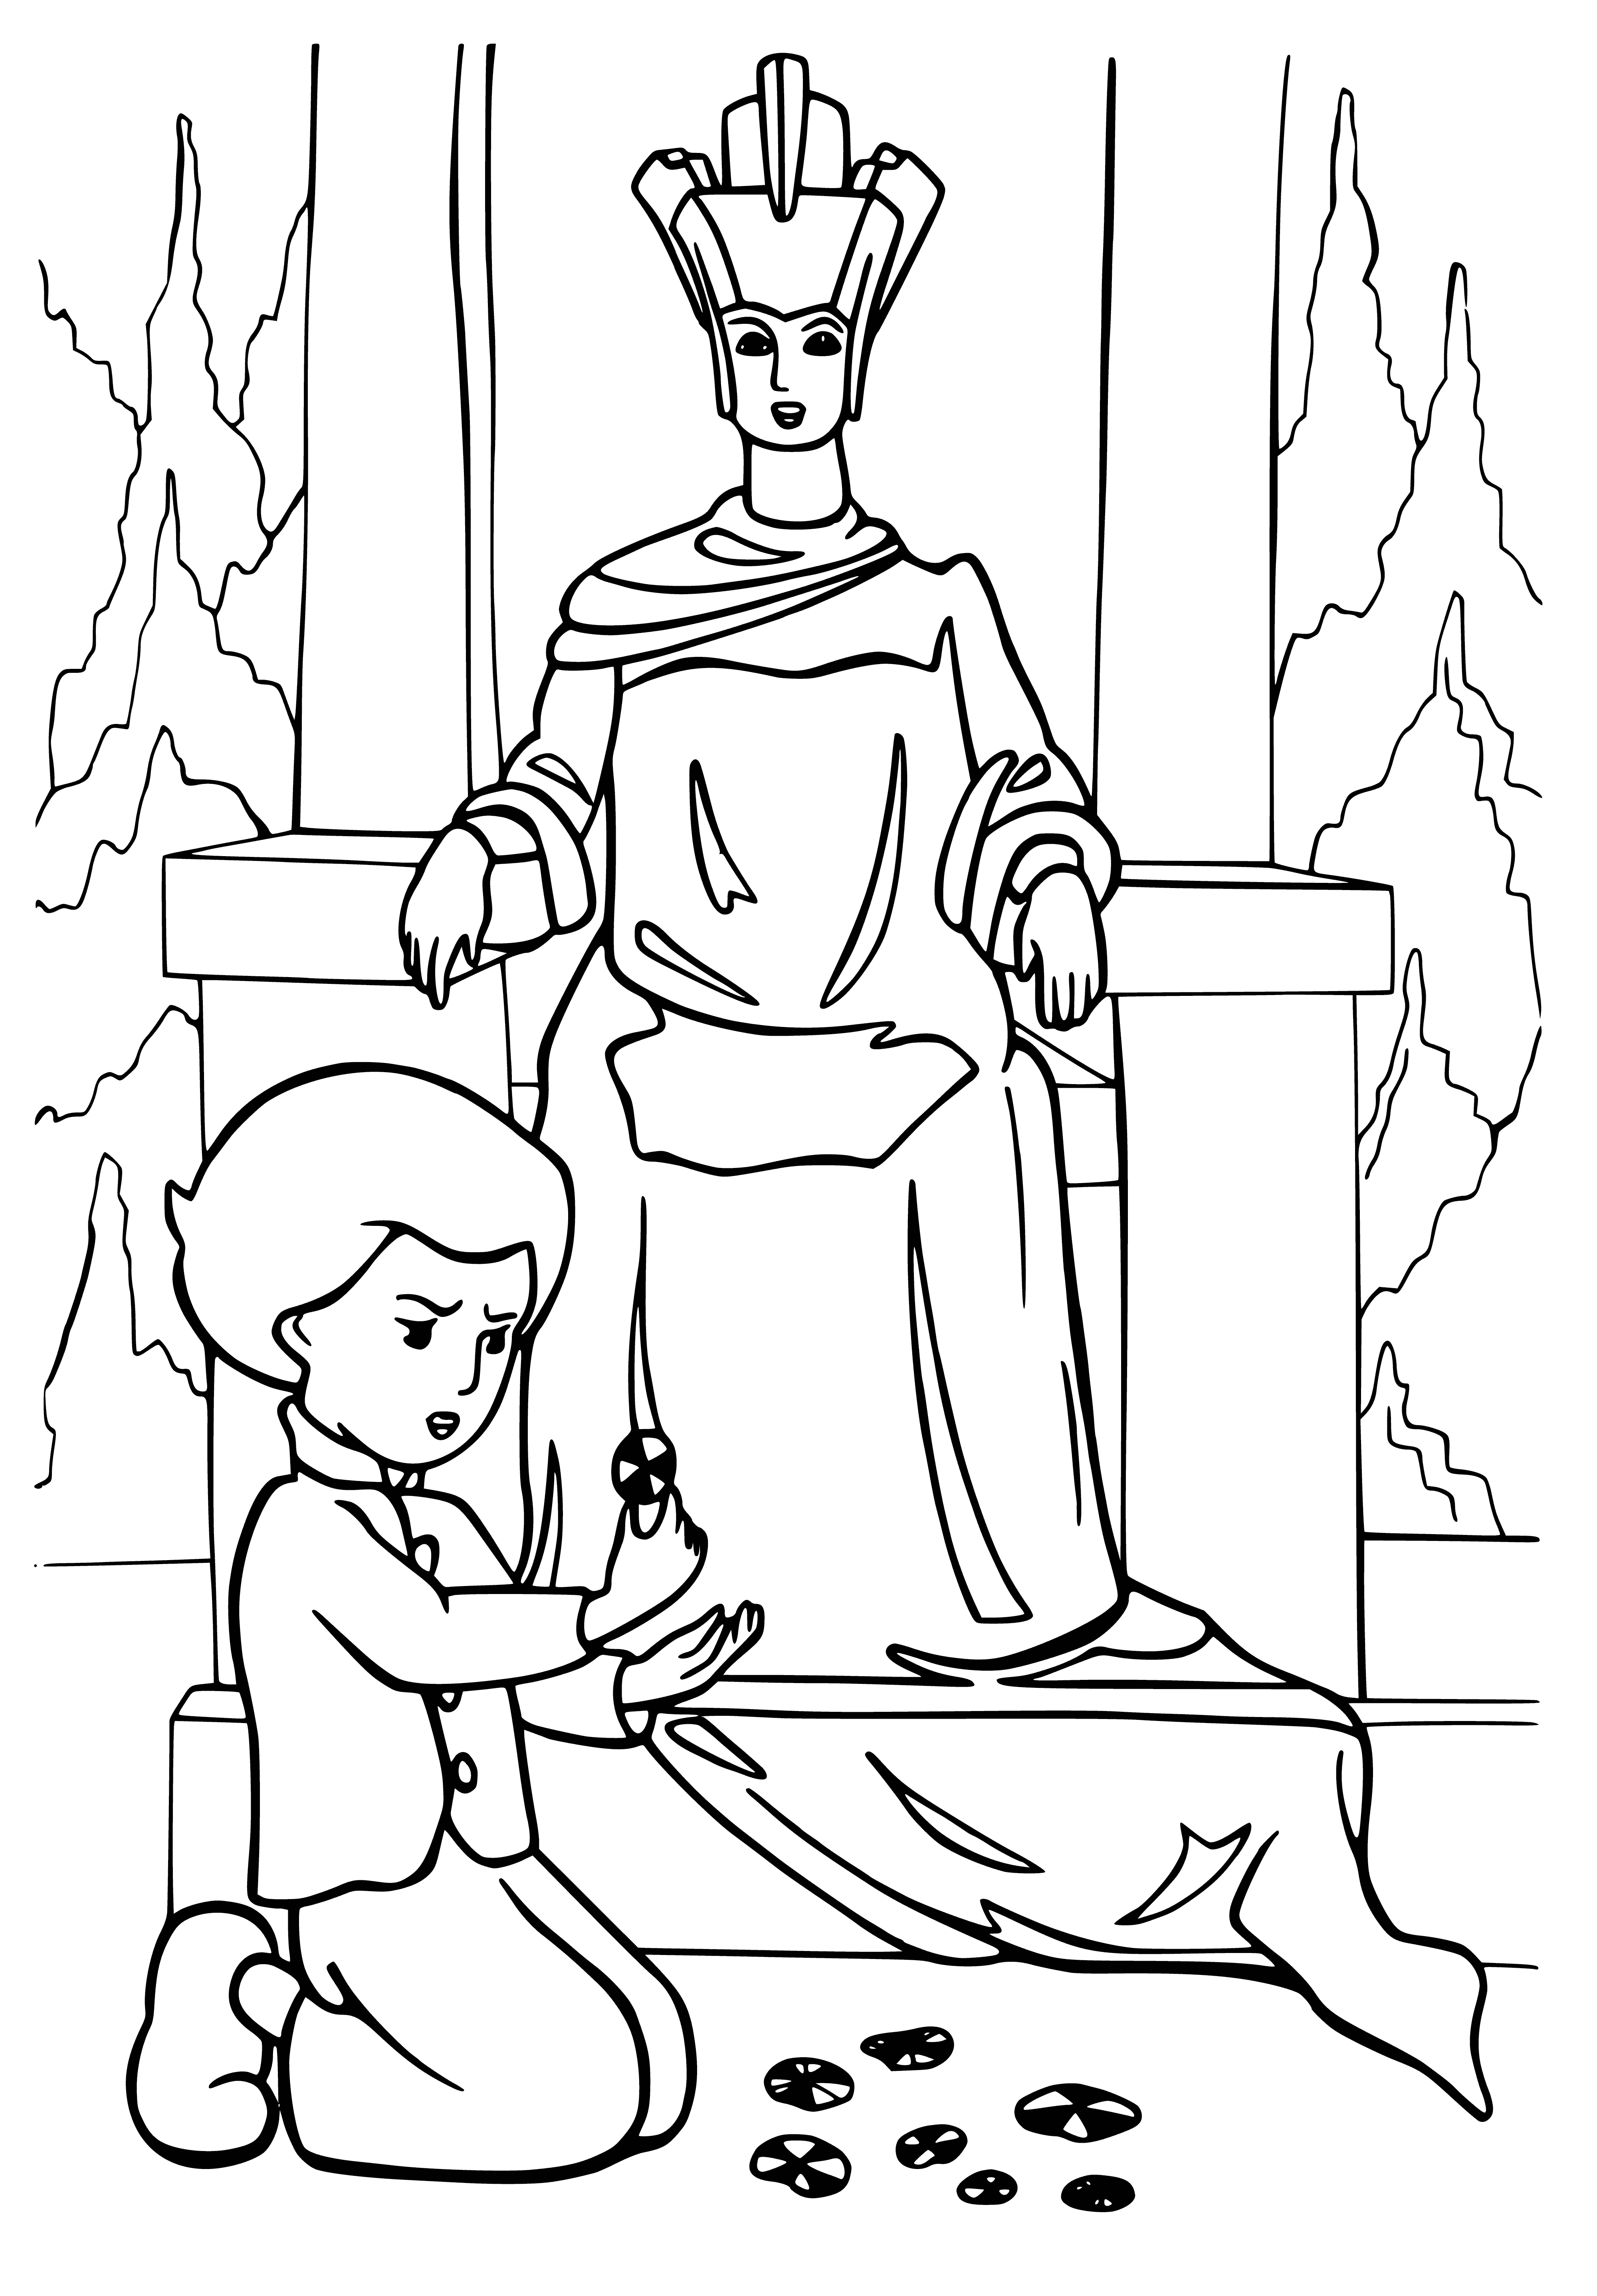 coloring page: Kai meets the Snow Queen at her castle, both smile happily.